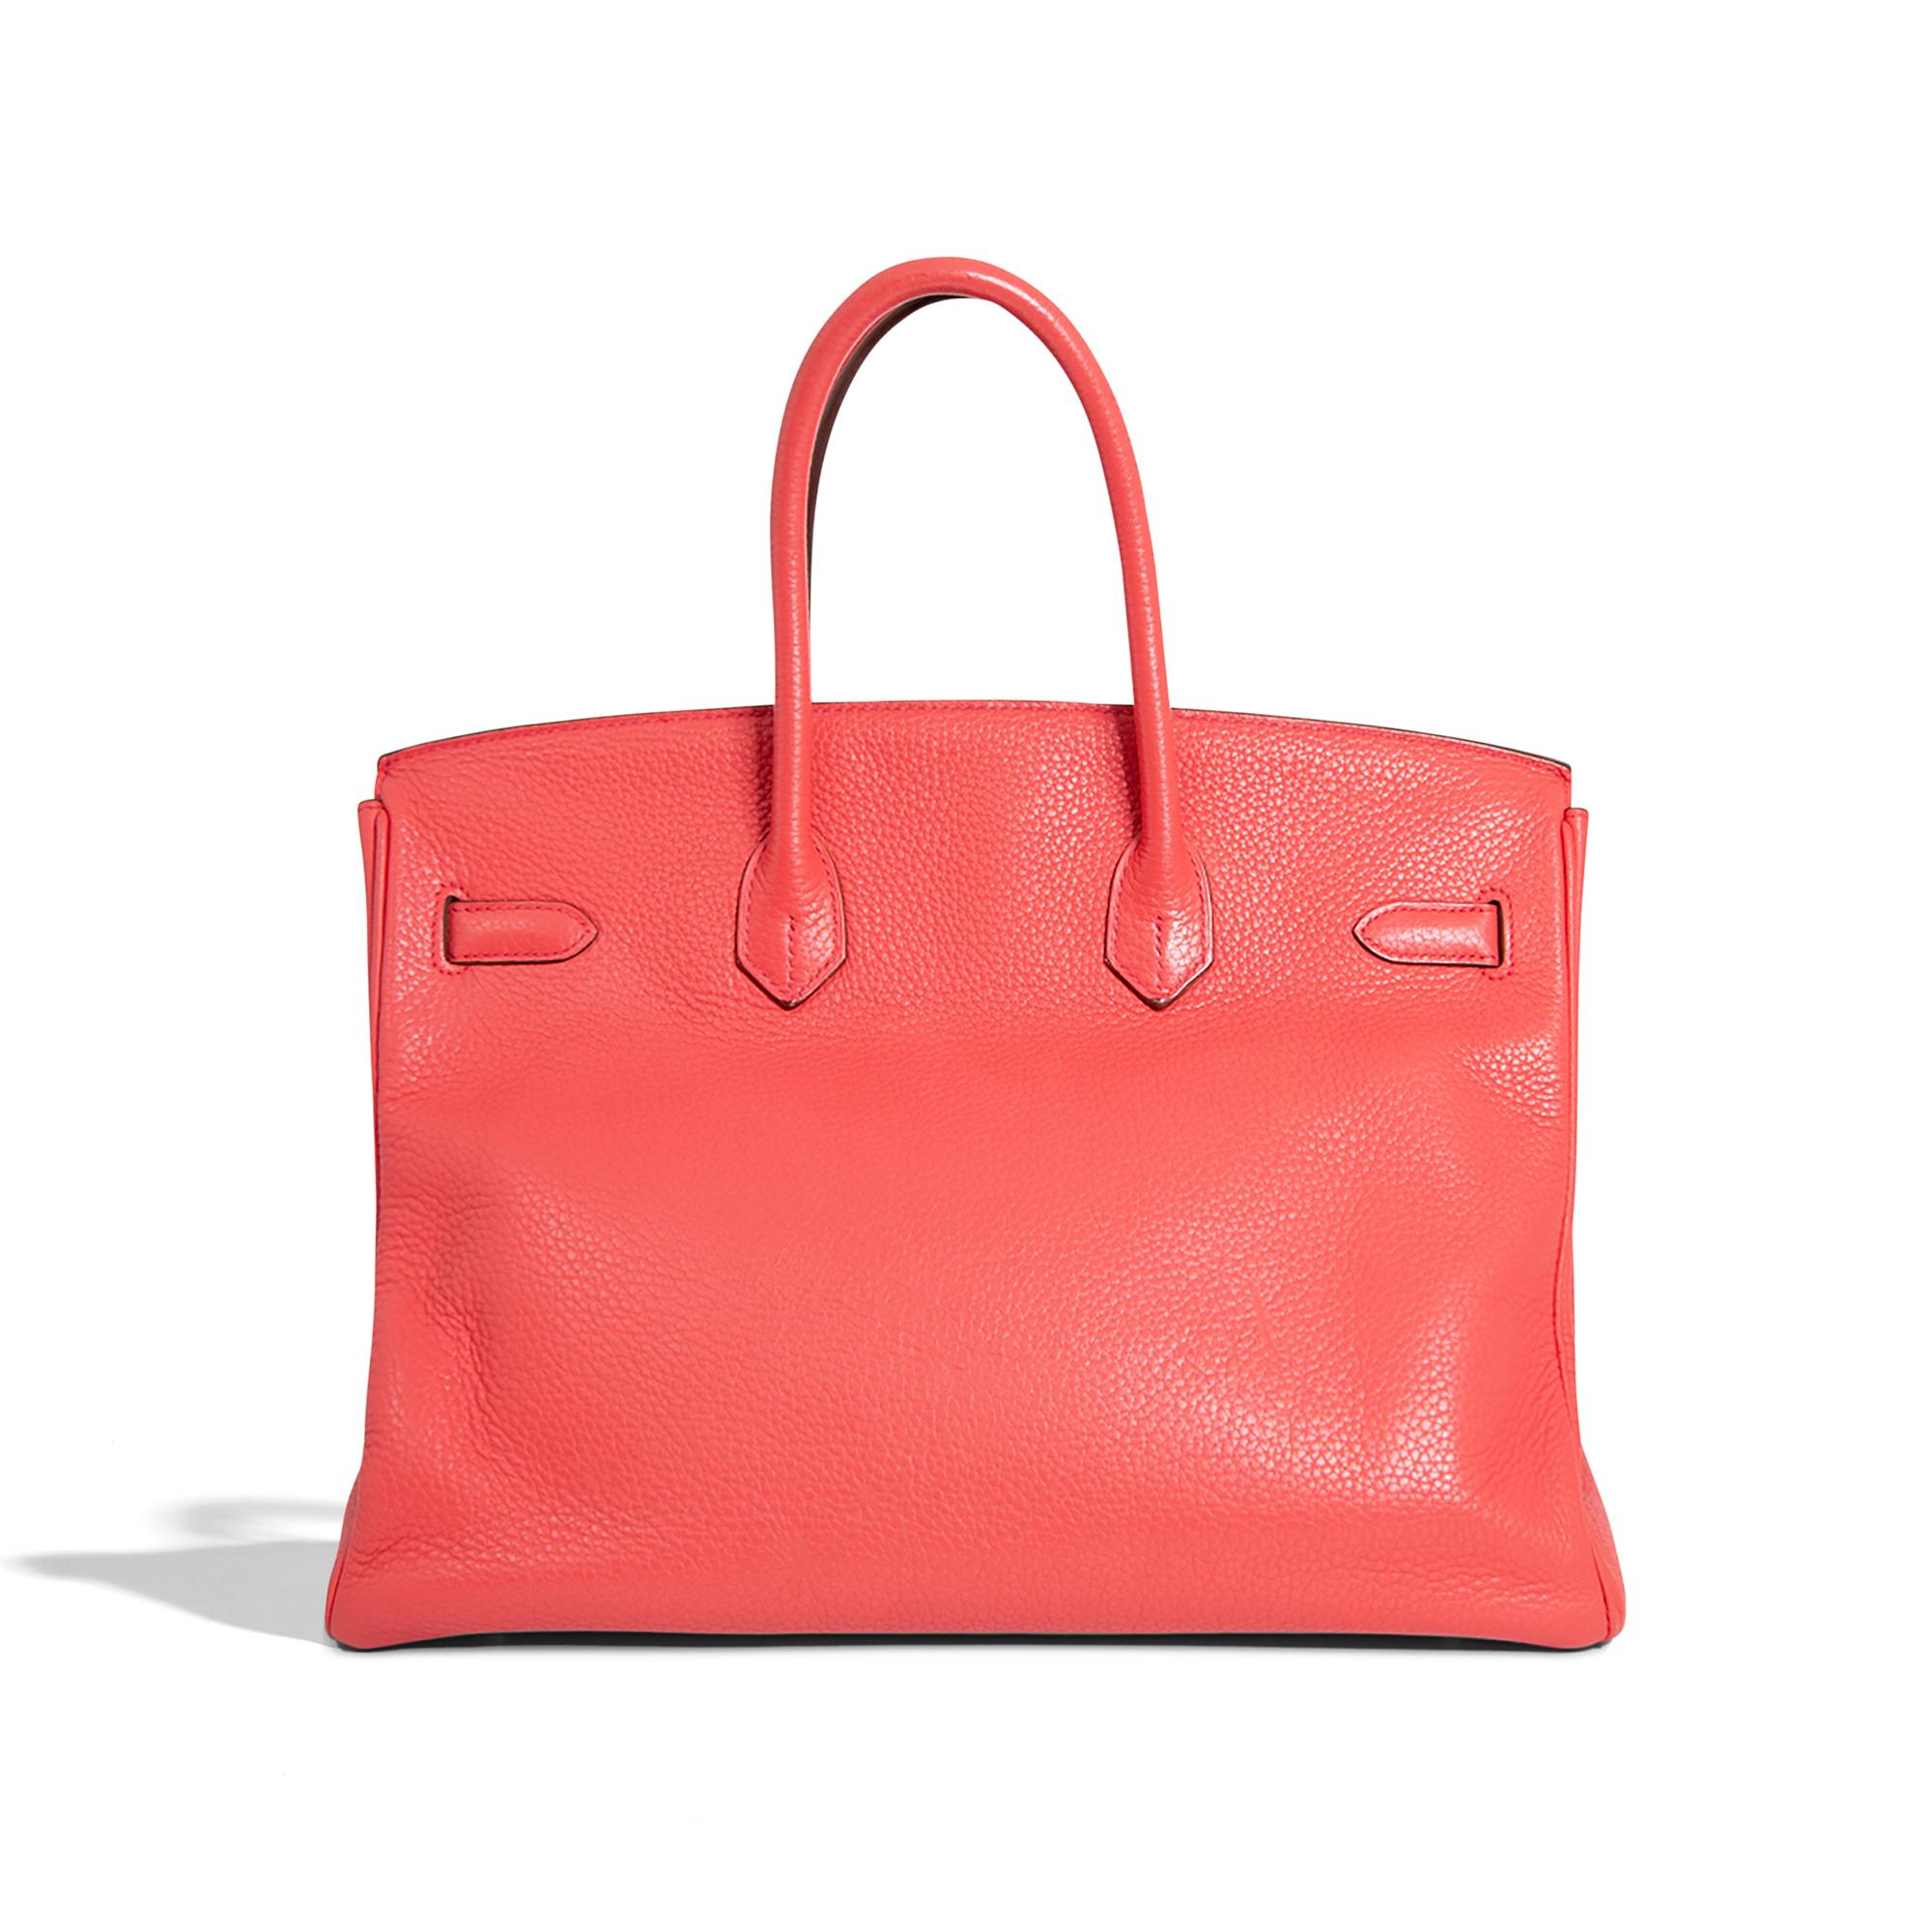 Crafted in 2010, this 35cm Birkin makes a timeless fashion statement in Rose Jaipur Togo leather and Palladium hardware. From the Togo leather's luxurious grain to the vintage-inspired hardware, this handbag is a sophisticated and exclusive piece,